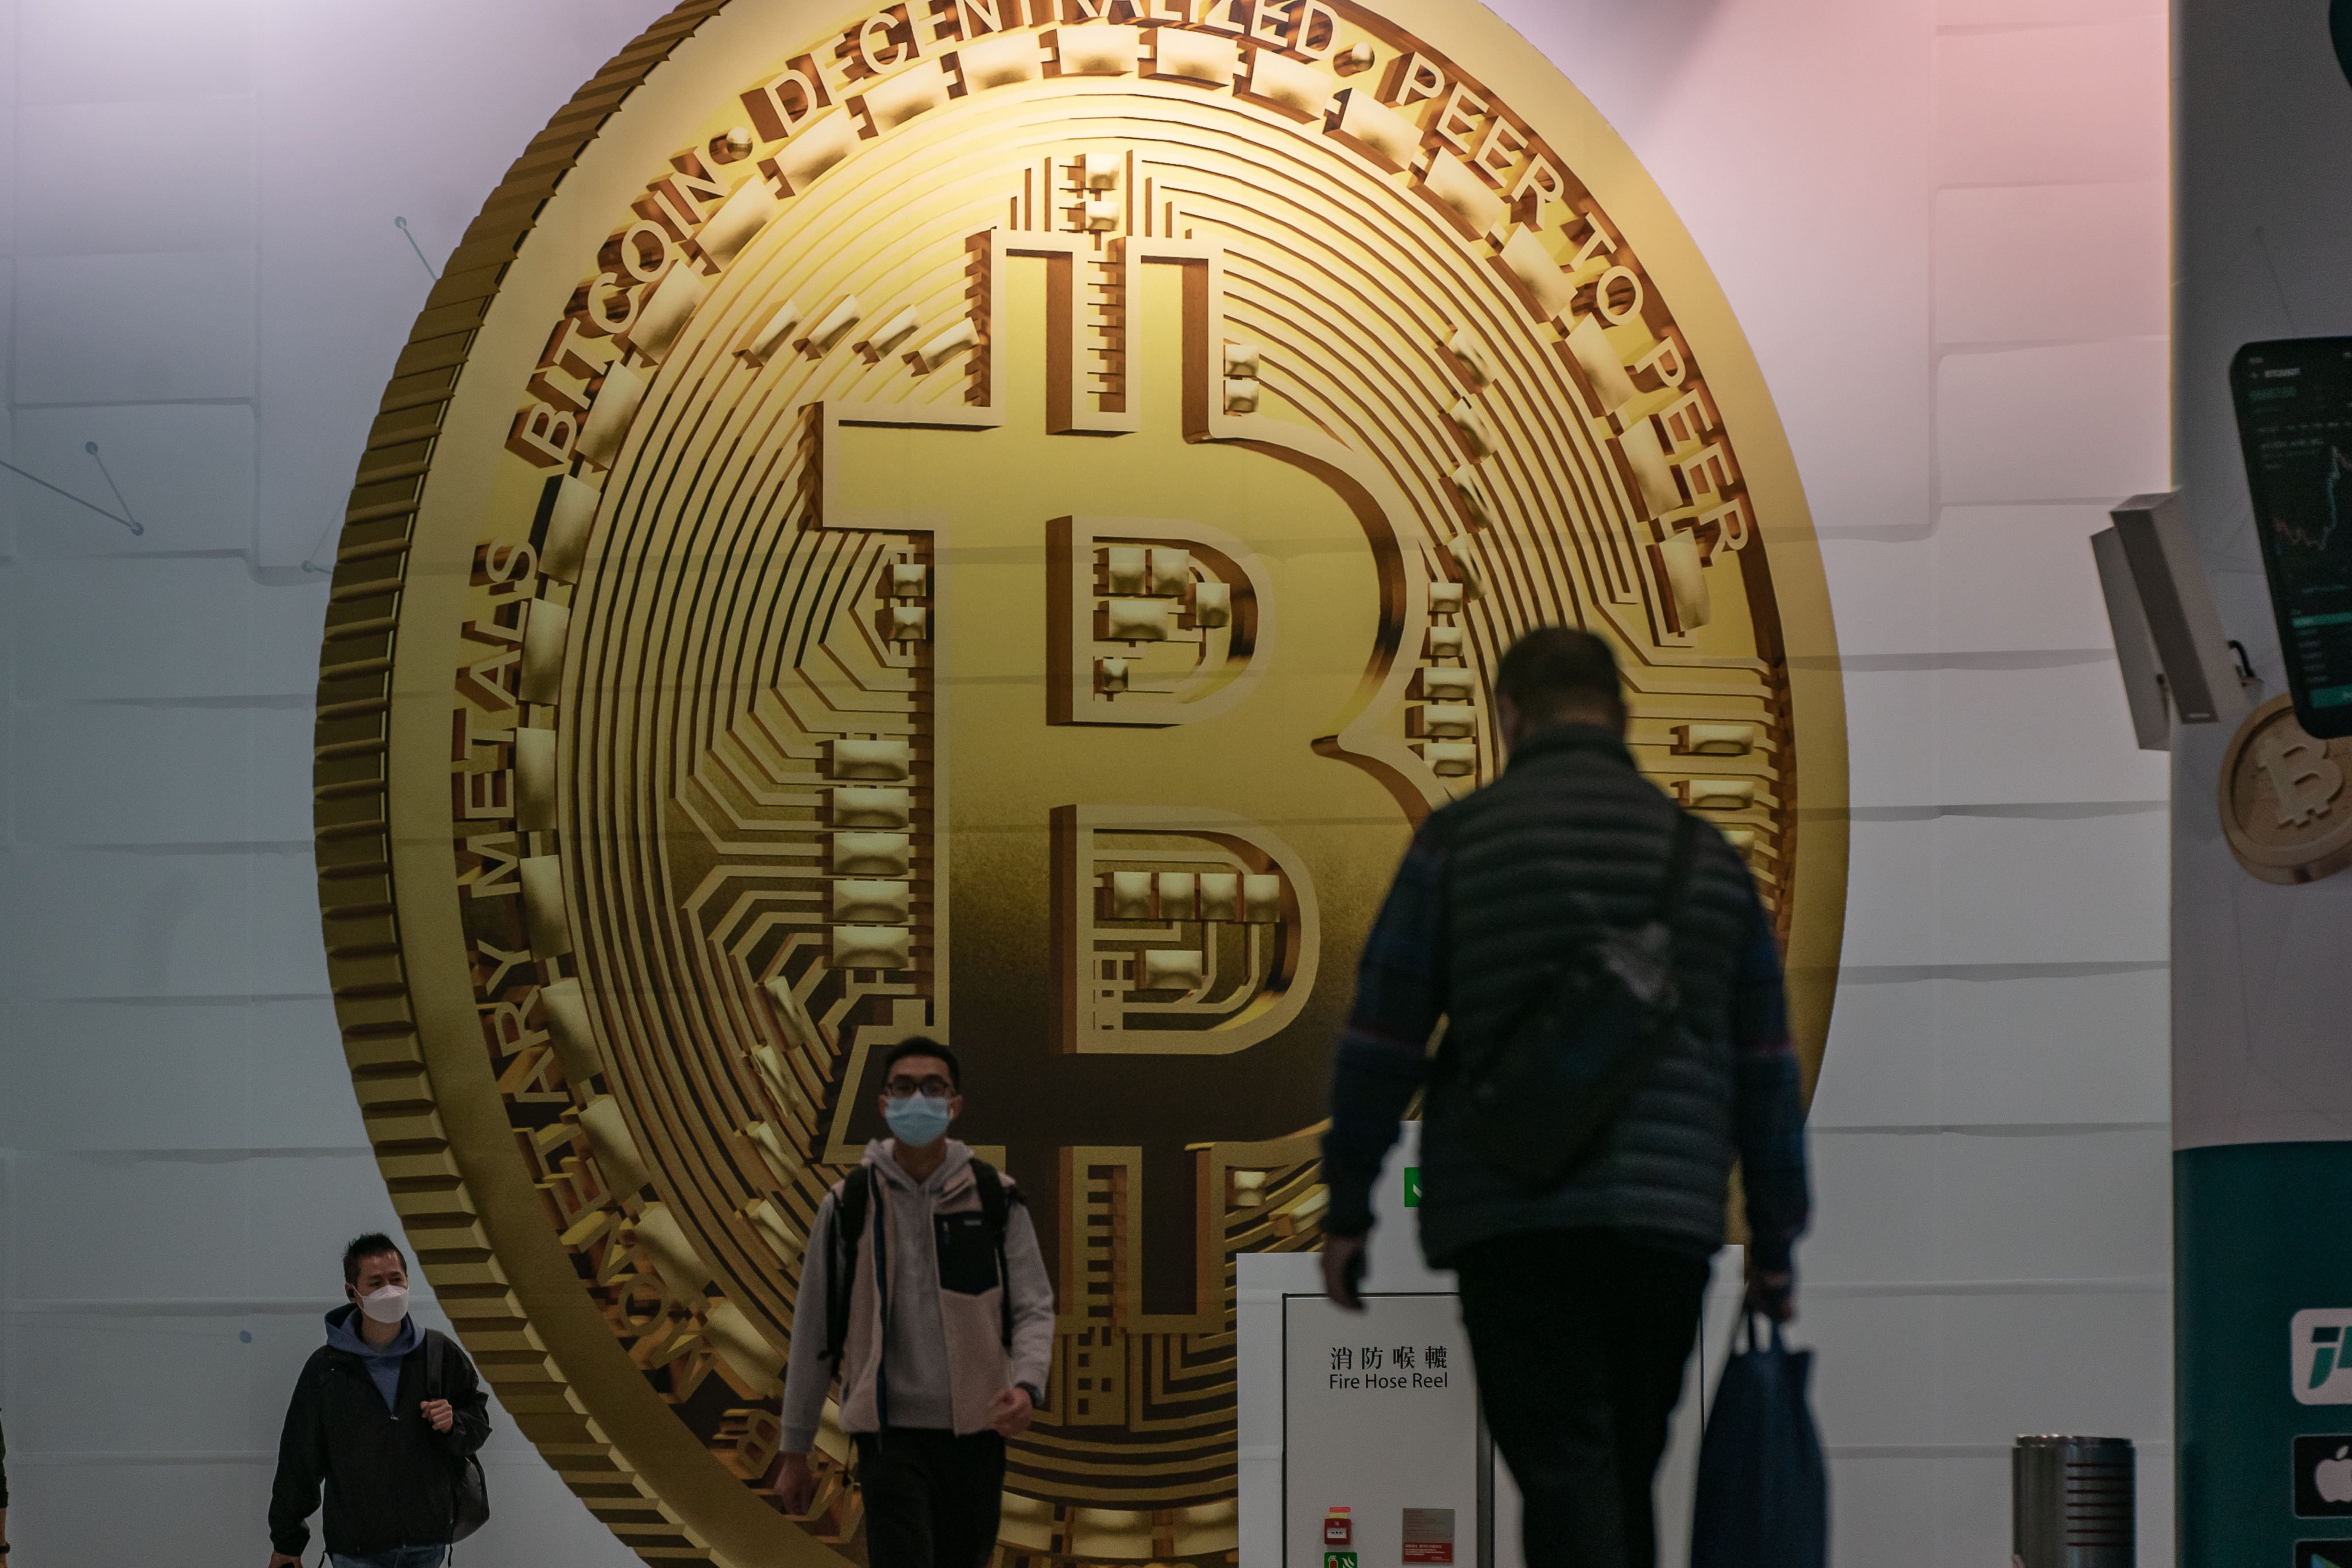 Pedestrians walk past an advertisement in Hong KOng displaying a bitcoin cryptocurrency token on February 15, 2022. Photo: Getty Images